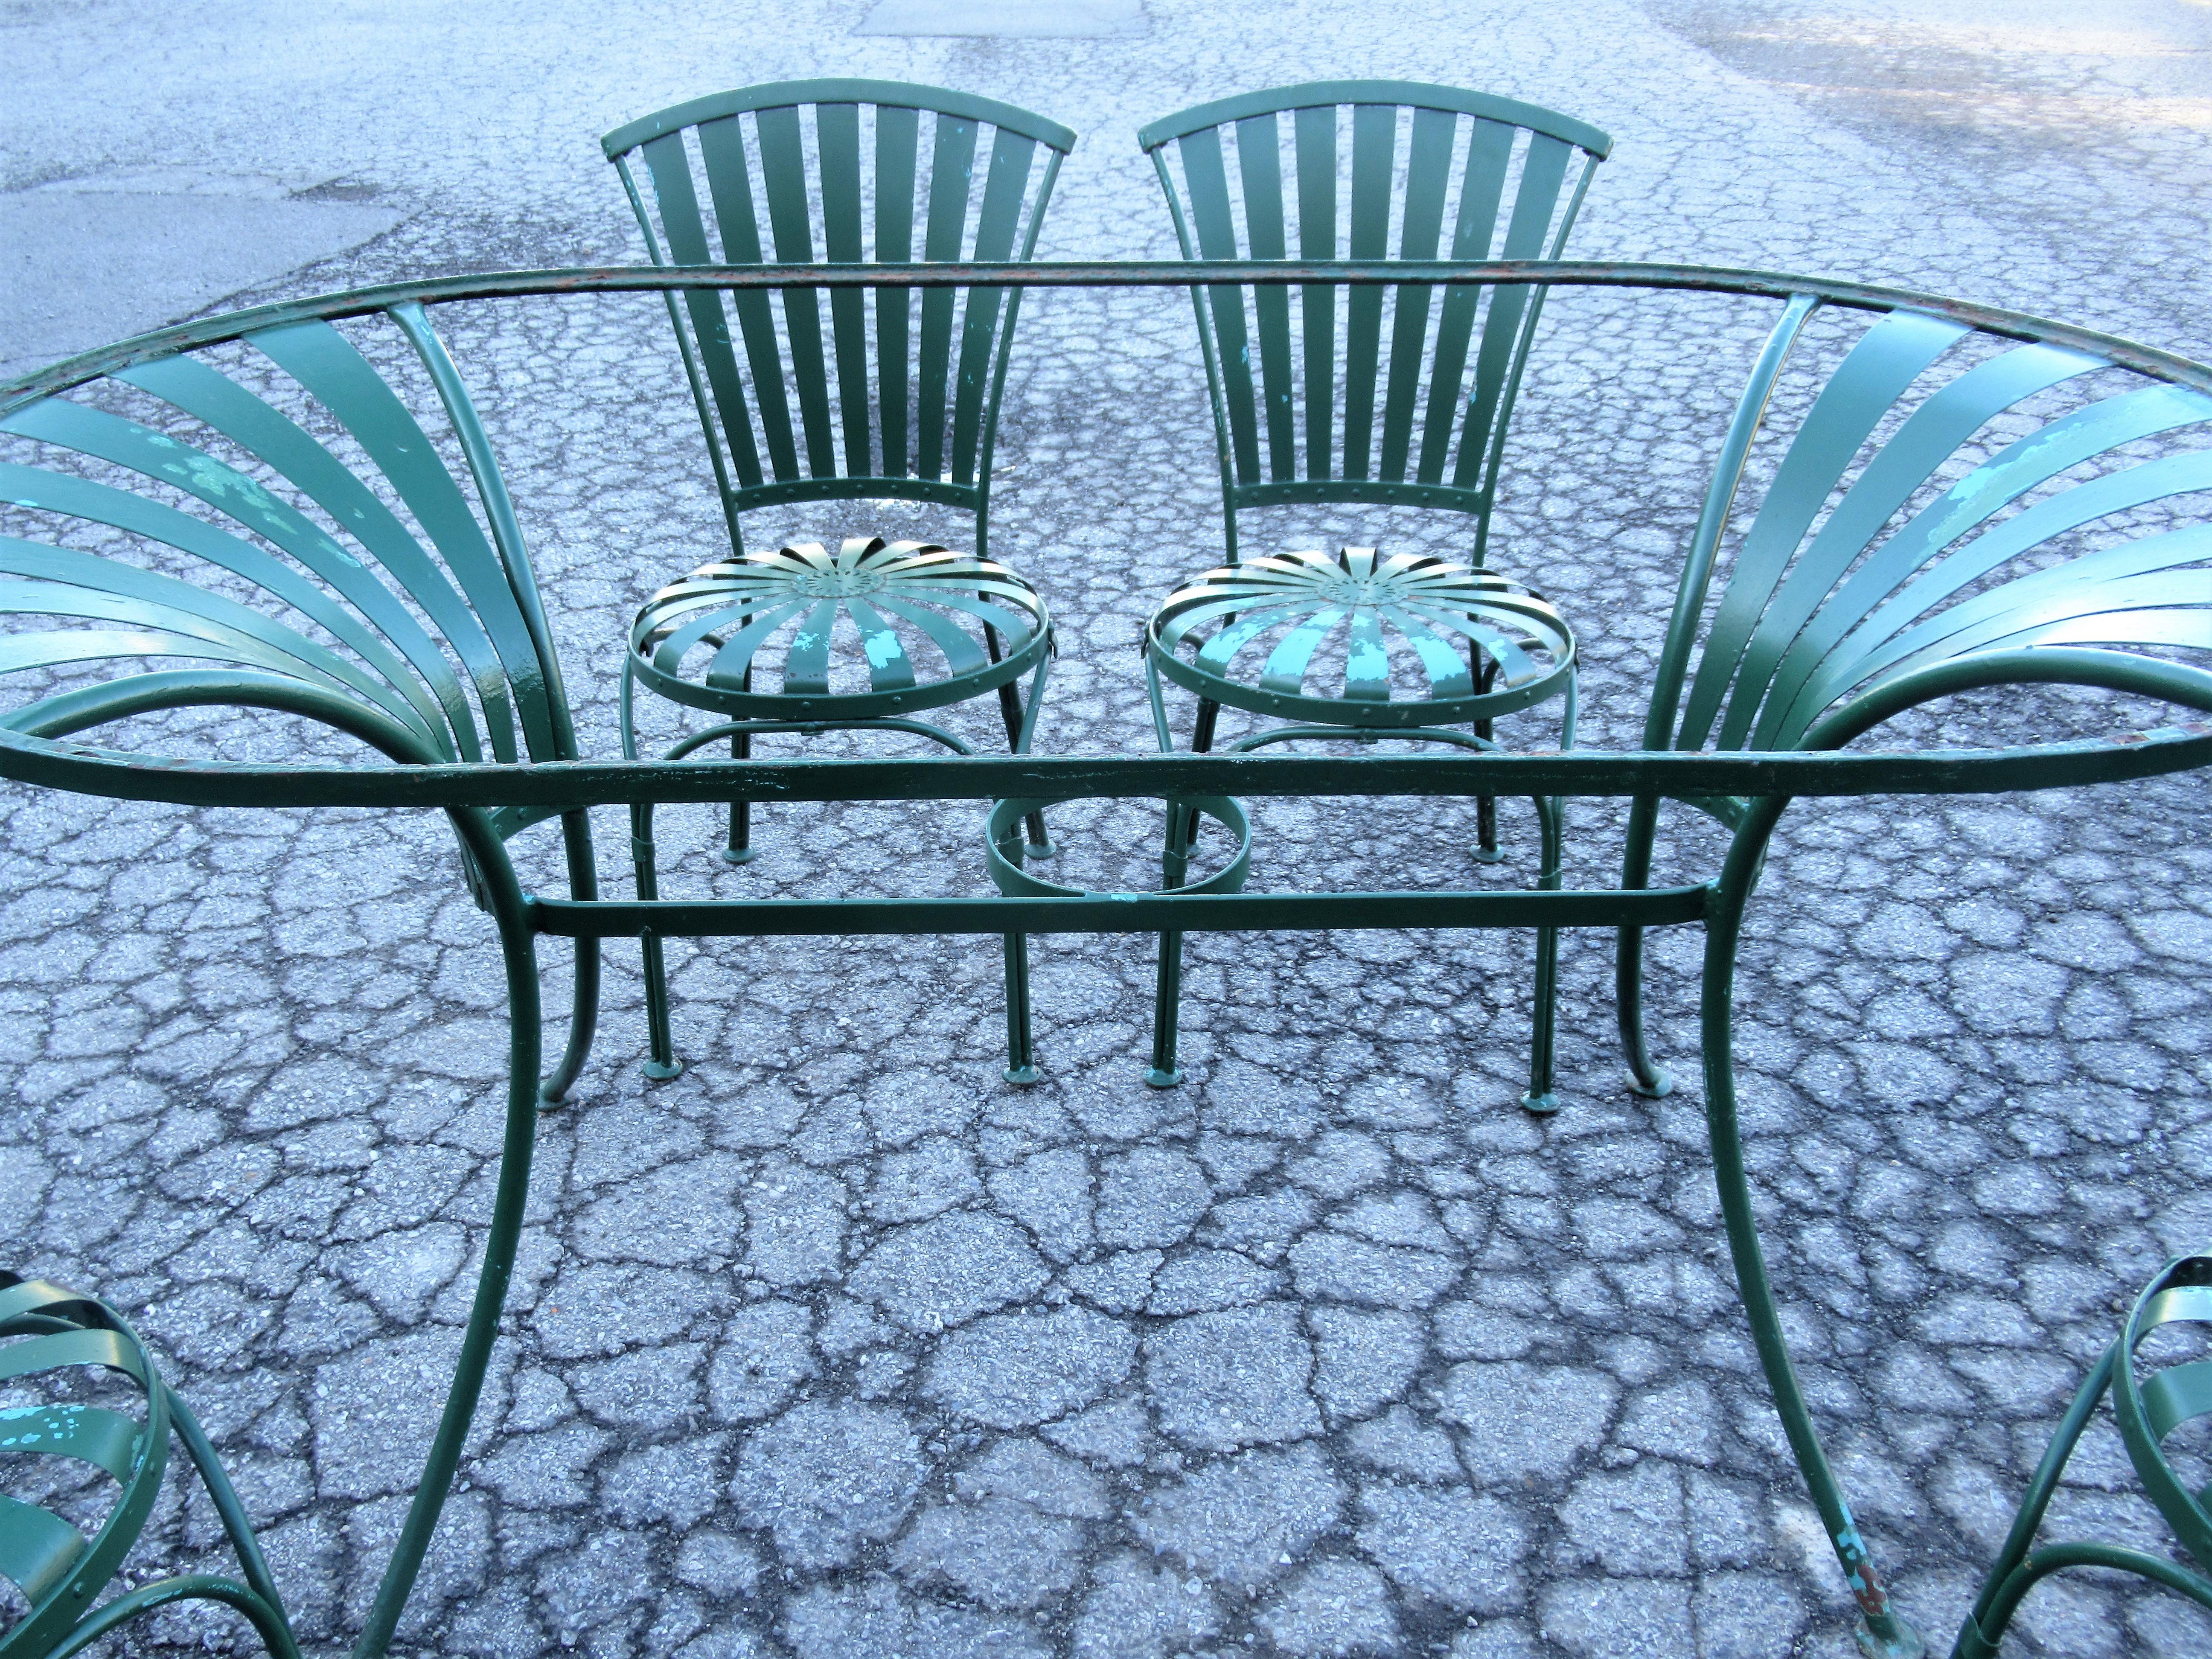 Francois Carre steel oval garden dining table and four matching riveted spring steel seat chairs in overall very good vintage condition, circa 1930. Table measures 60 inches wide x 33 3/4 inches deep x 29 inches high. Chairs measure 32 inches high x